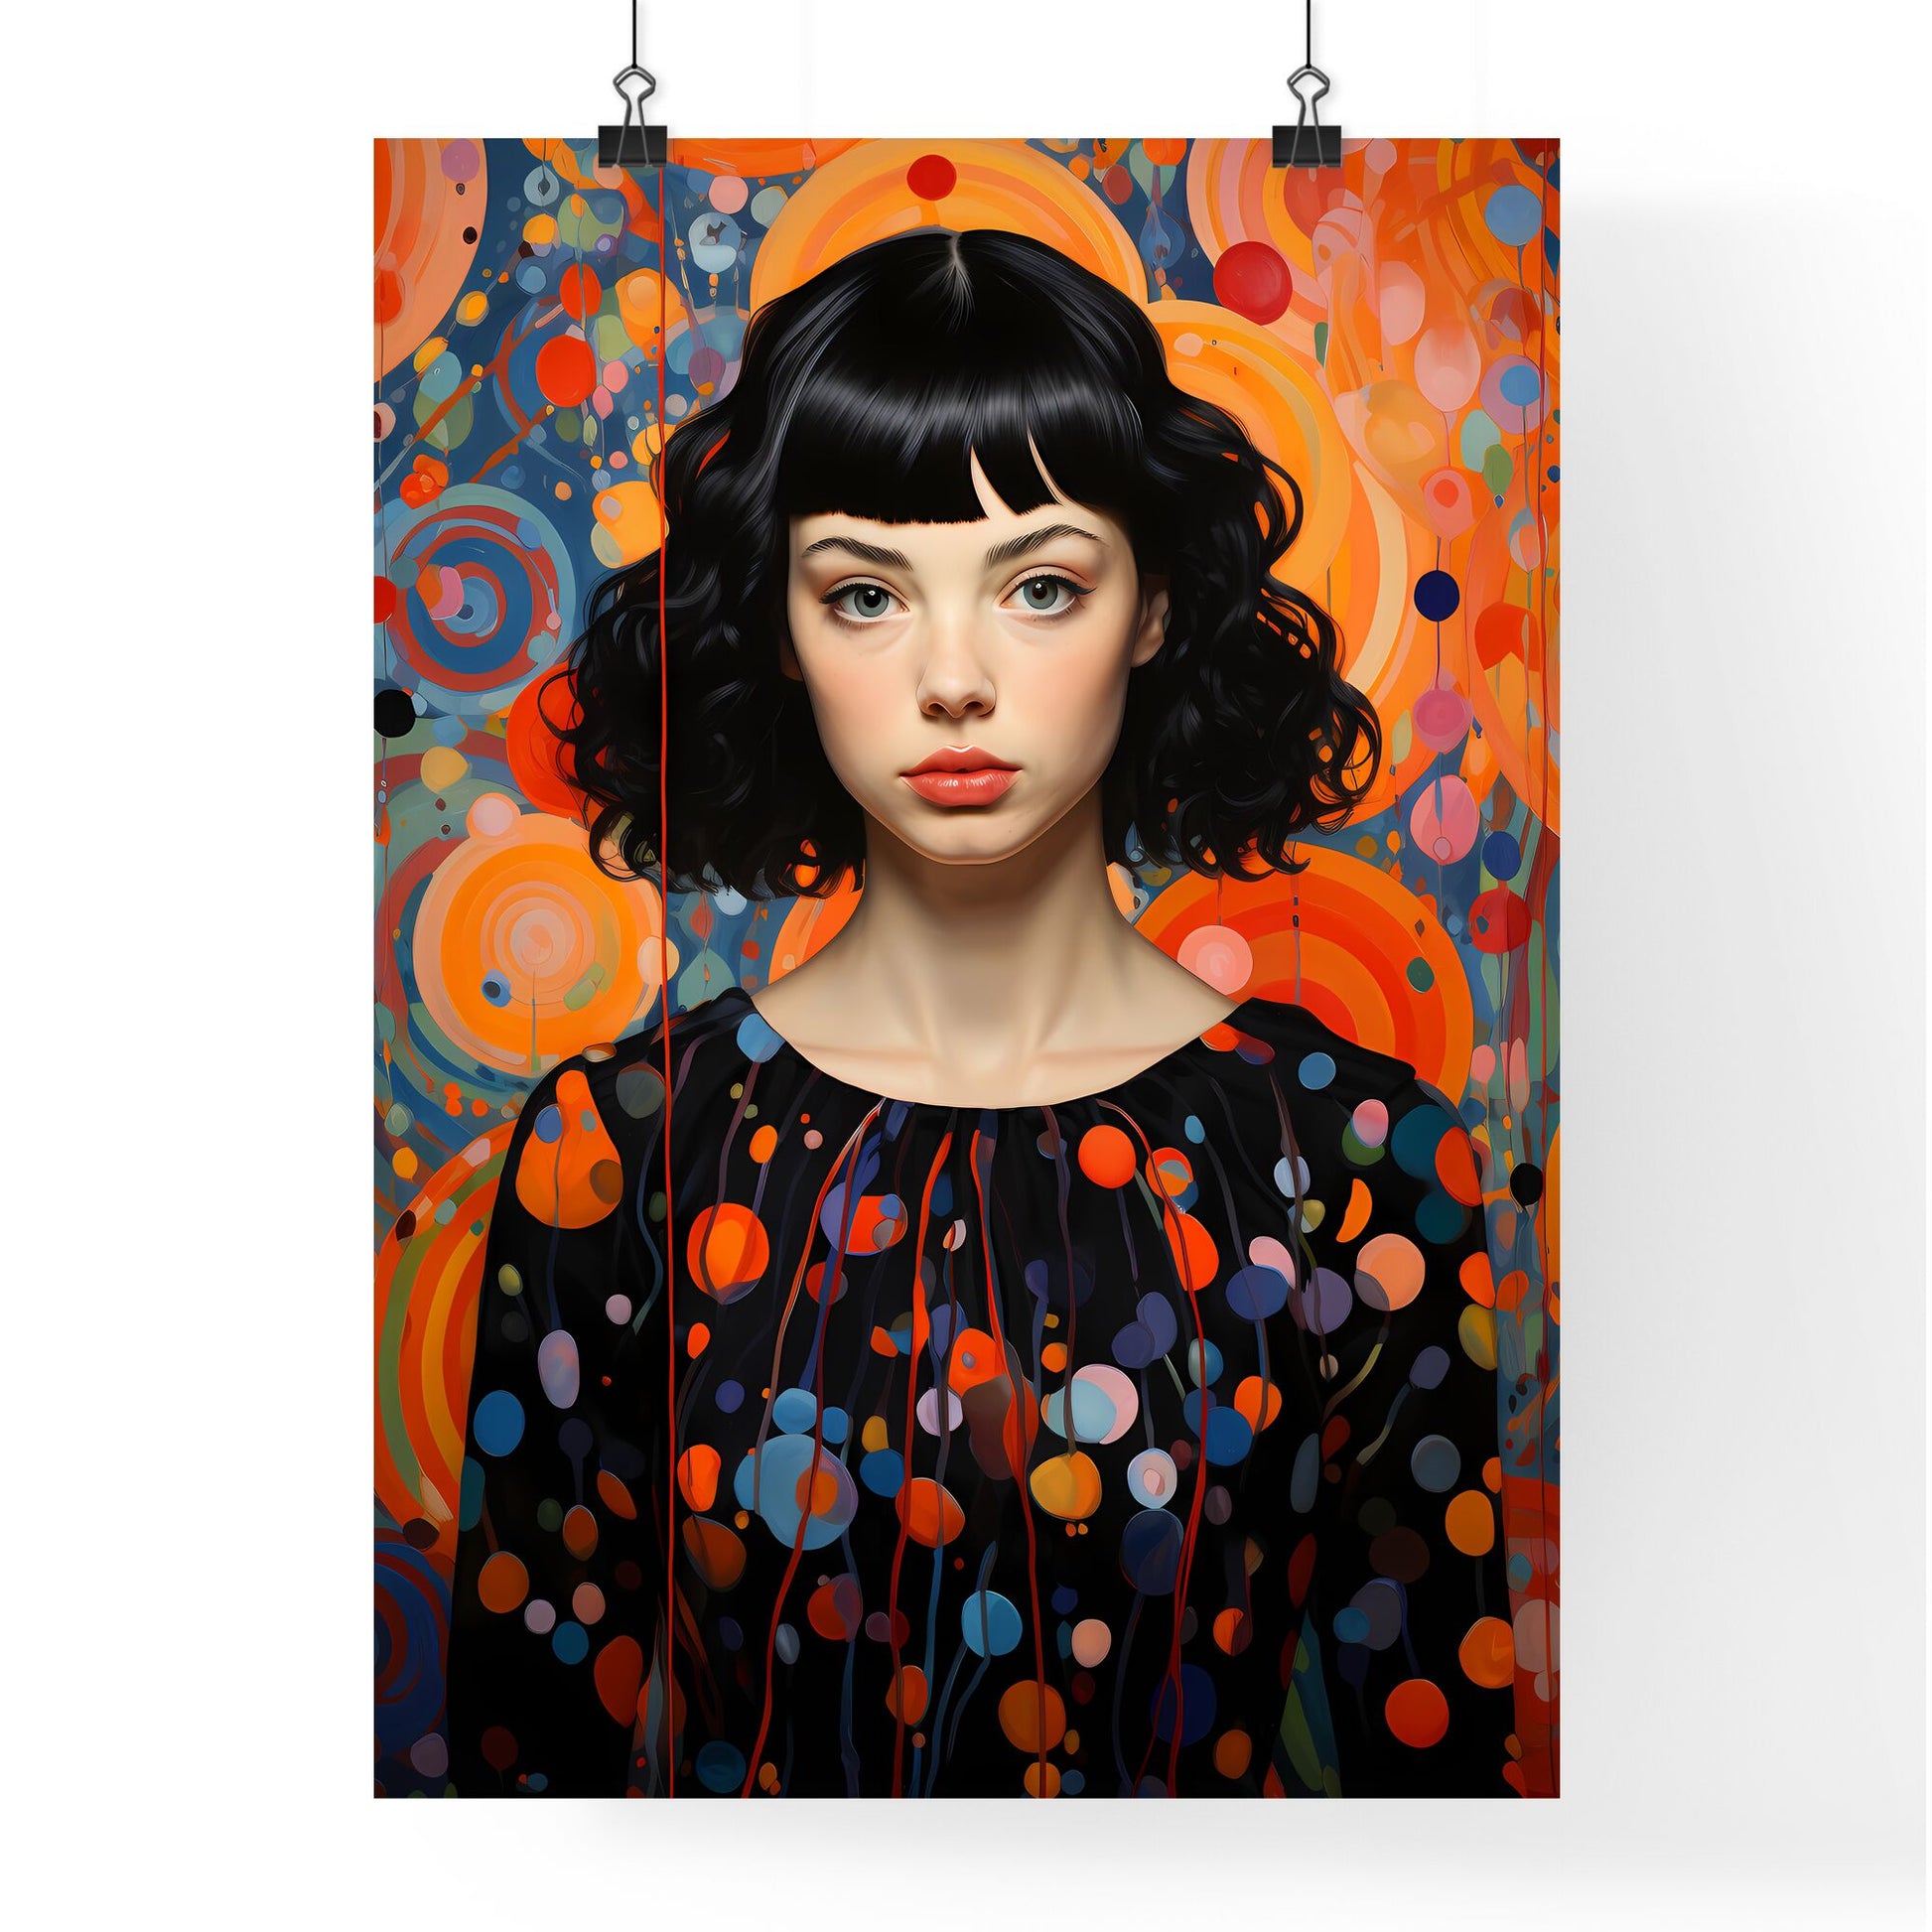 Yayoi Kusama Japanese Contemporary Artist - A Woman With Black Hair And A Colorful Background Default Title